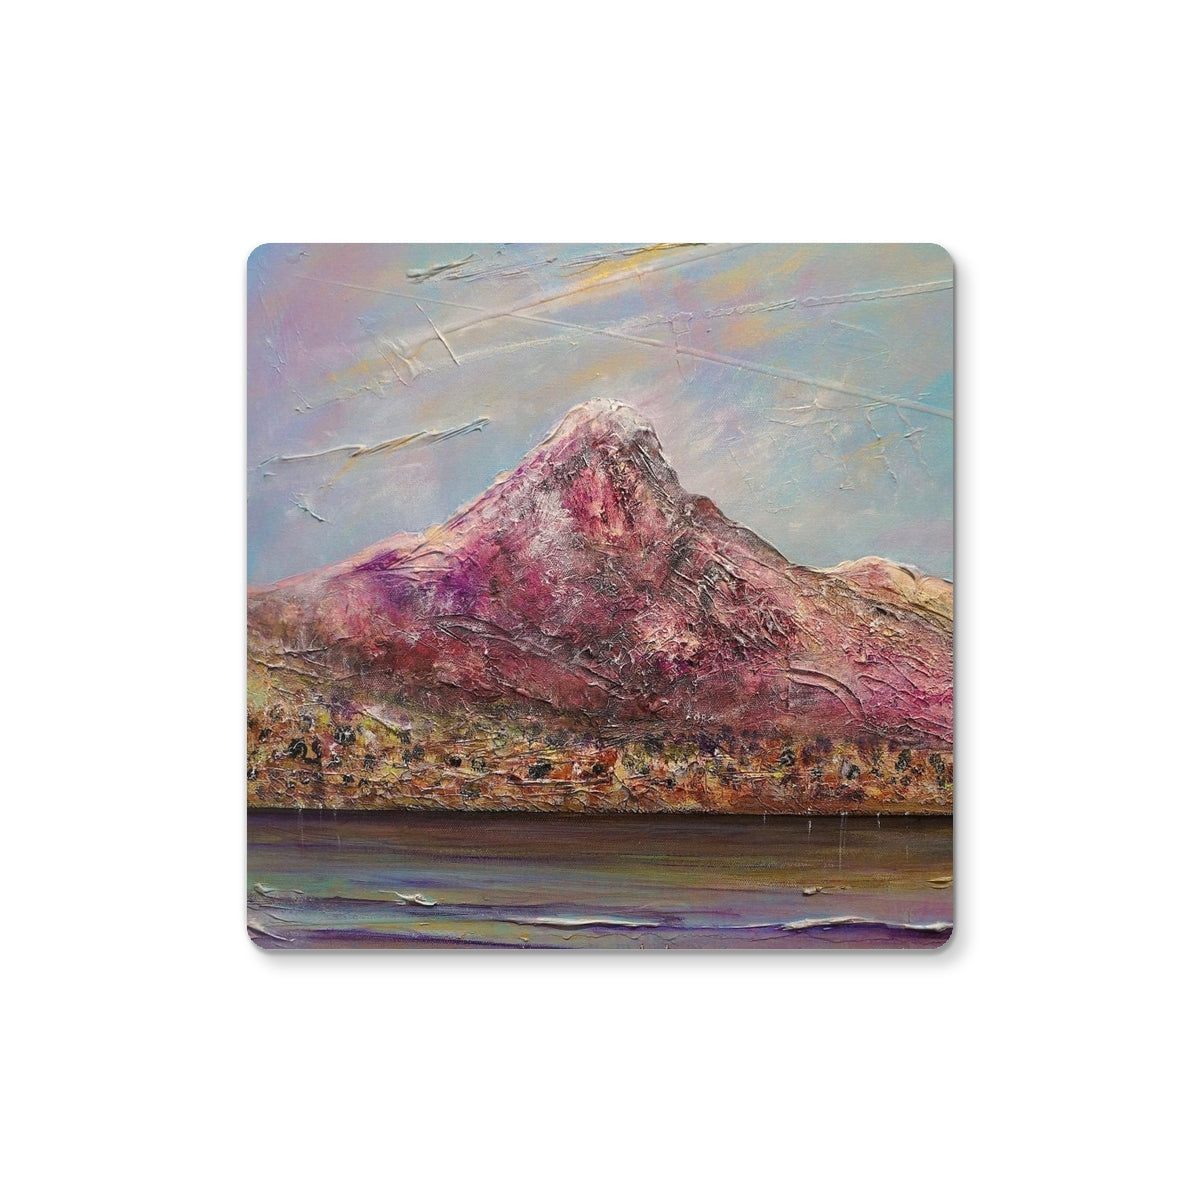 Ben Lomond Art Gifts Coaster-Coasters-Scottish Lochs & Mountains Art Gallery-2 Coasters-Paintings, Prints, Homeware, Art Gifts From Scotland By Scottish Artist Kevin Hunter